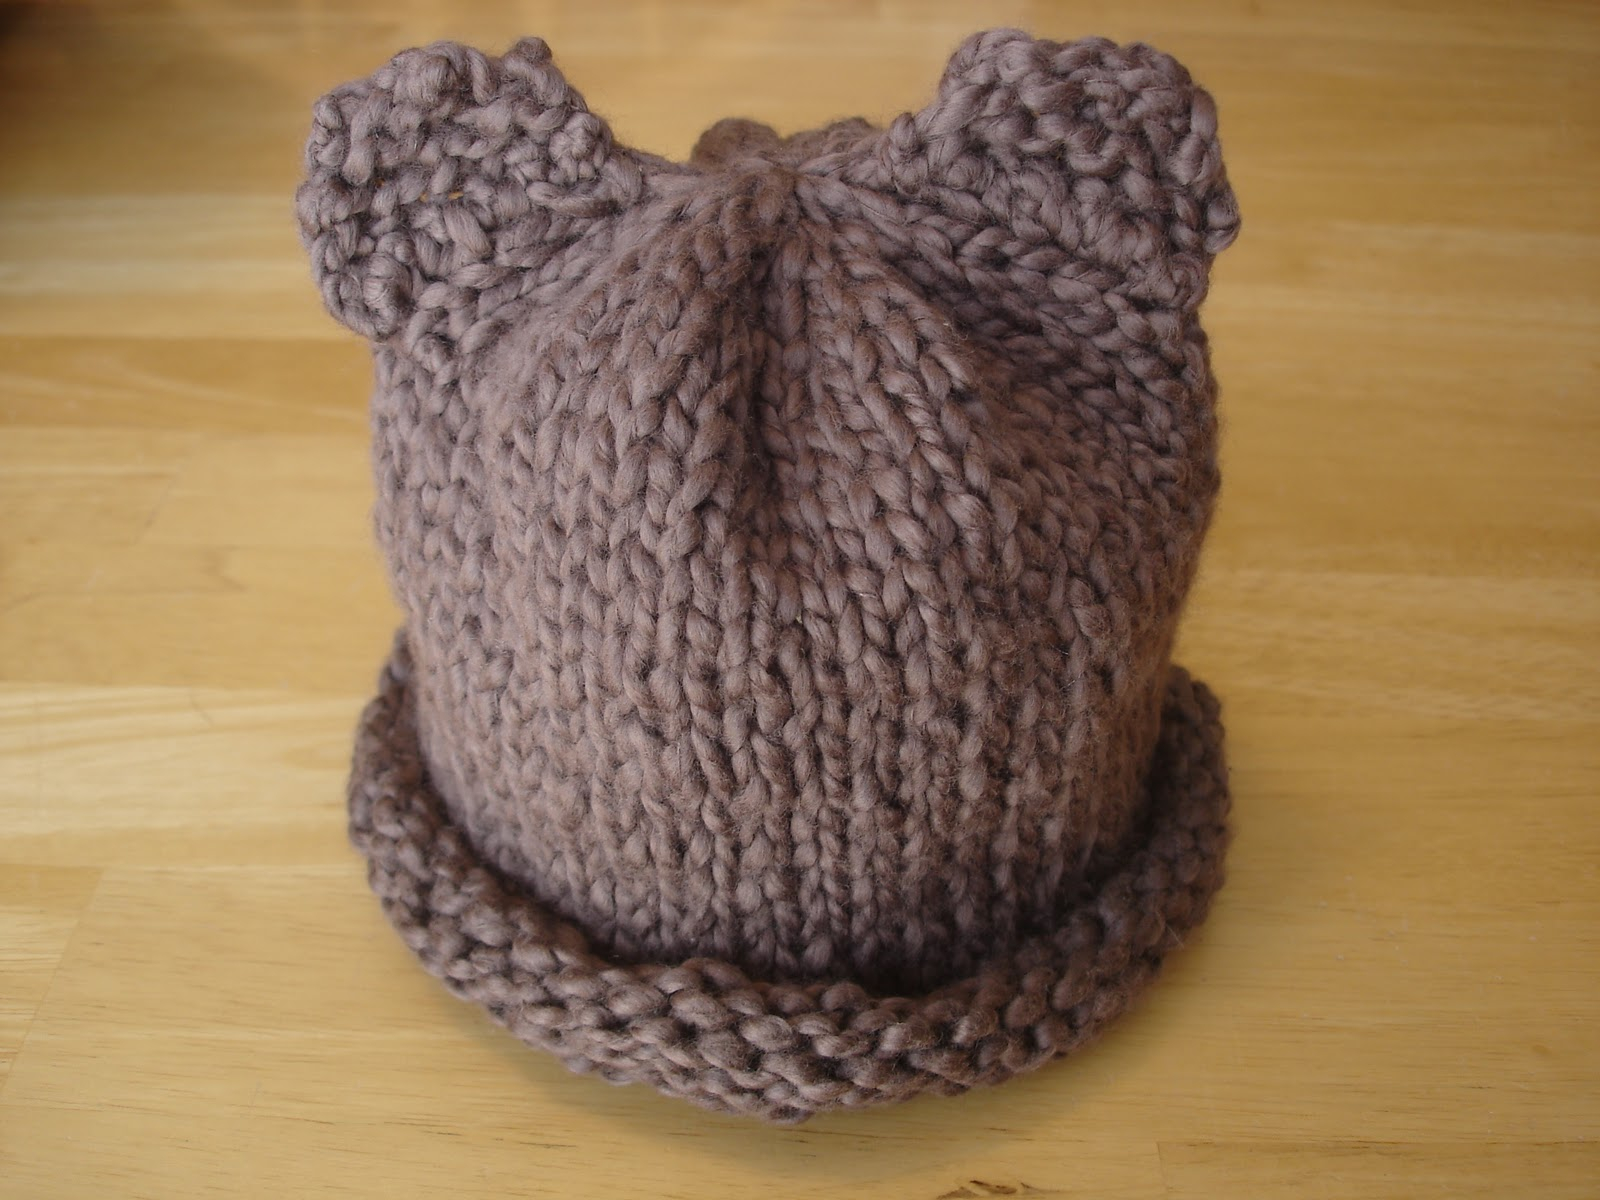 Knitted Preemie Hat Patterns Ba Hat Knitting Pattern Free Knitting Patternba Bear Crochet